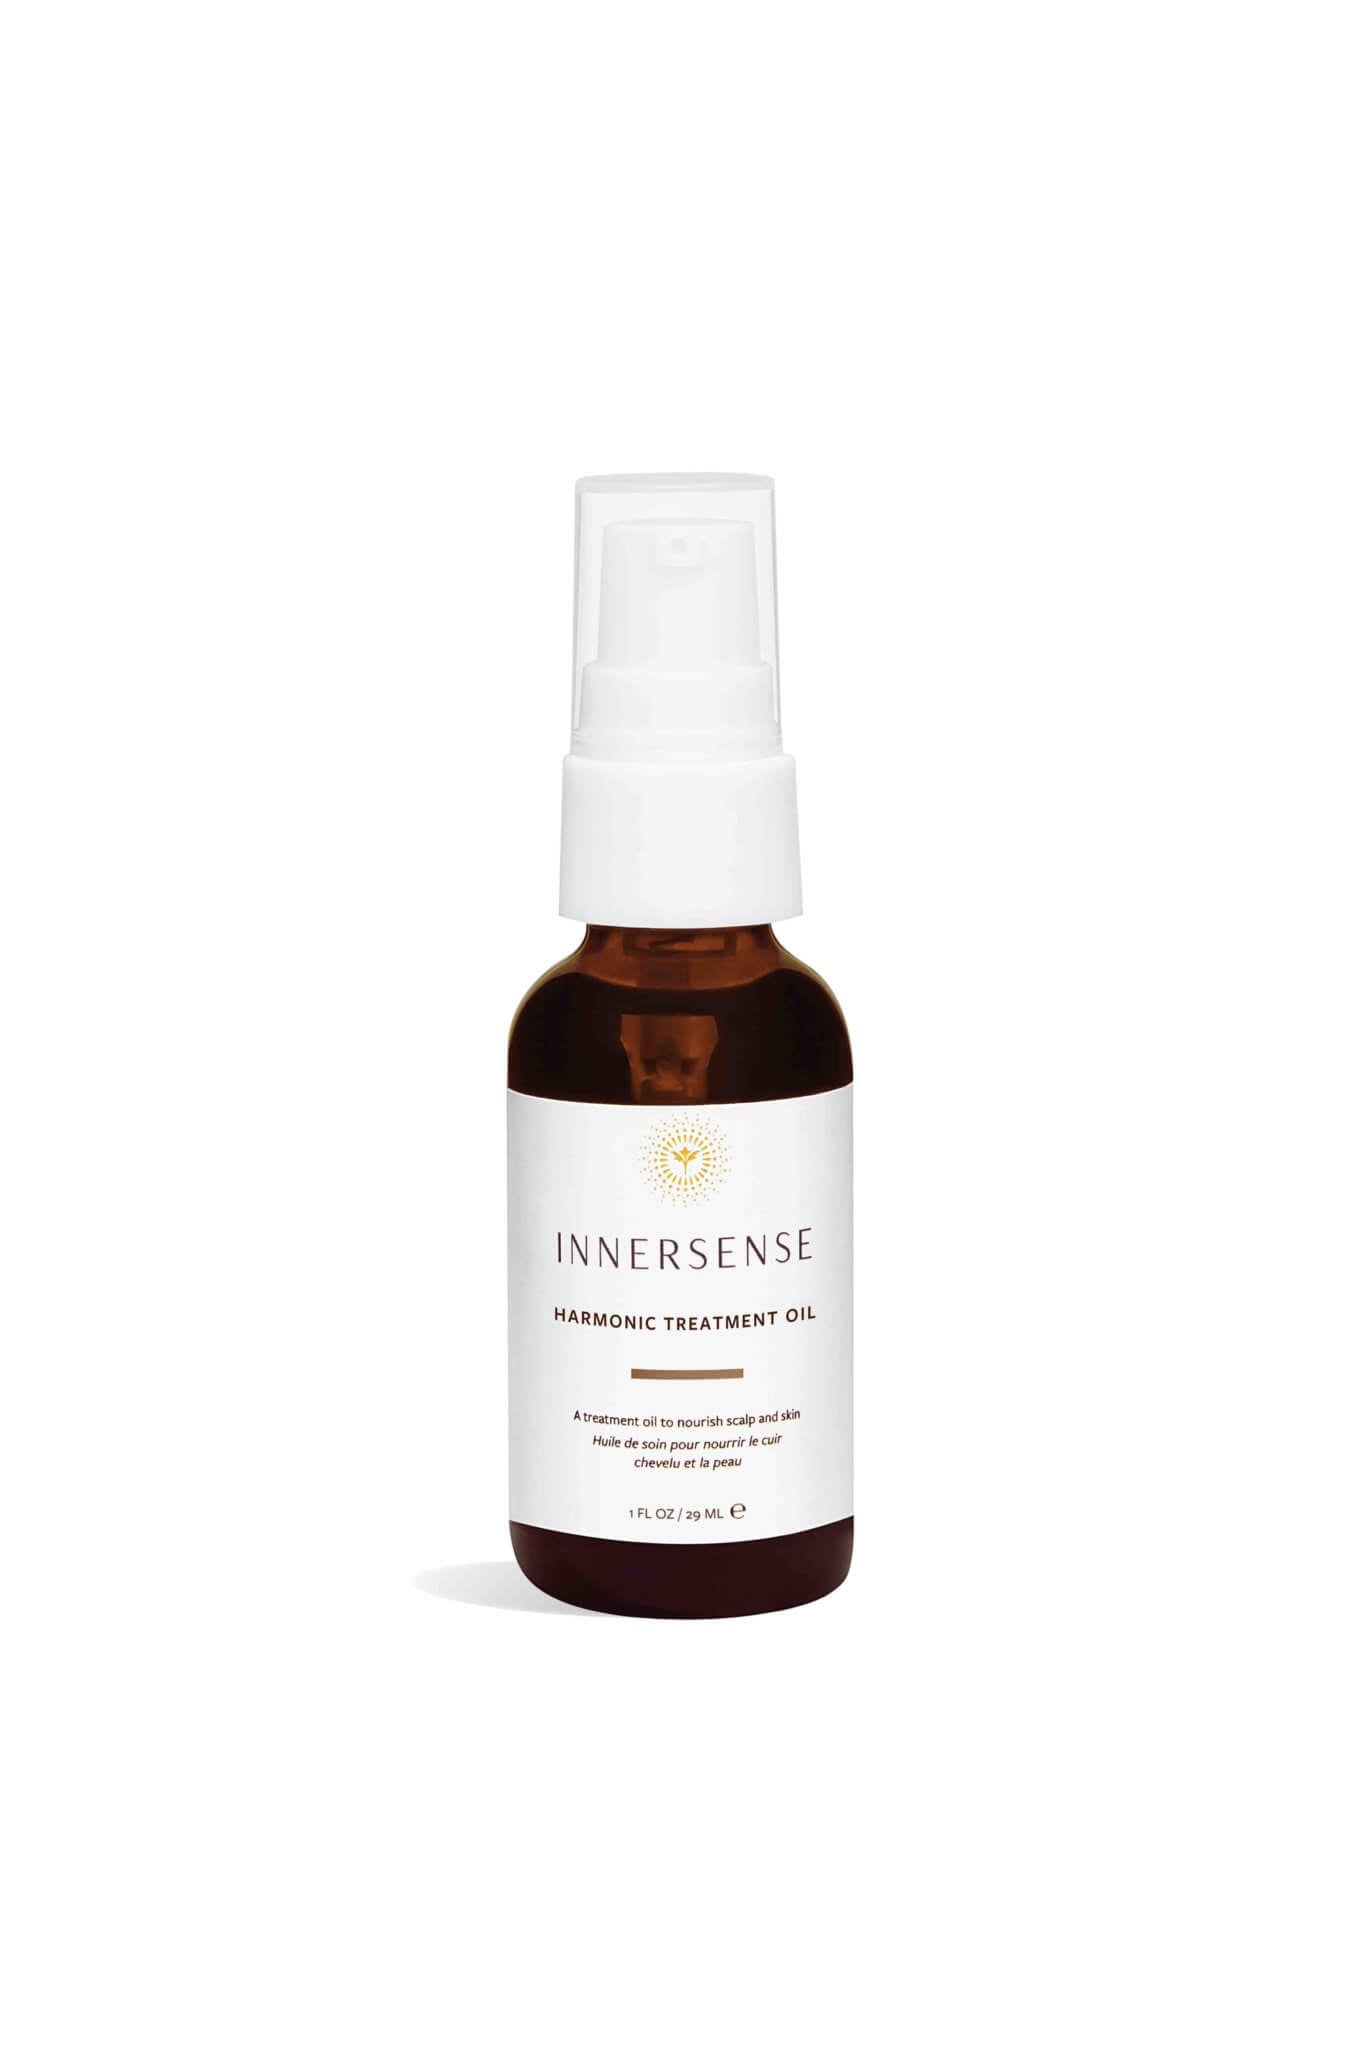 Nourish the scalp and skin with this rich Harmonic Treatment. Formulated with flower essences and oils, including evening primrose, macadamia and tamanu, to balance skin and scalp health and nutrition. 